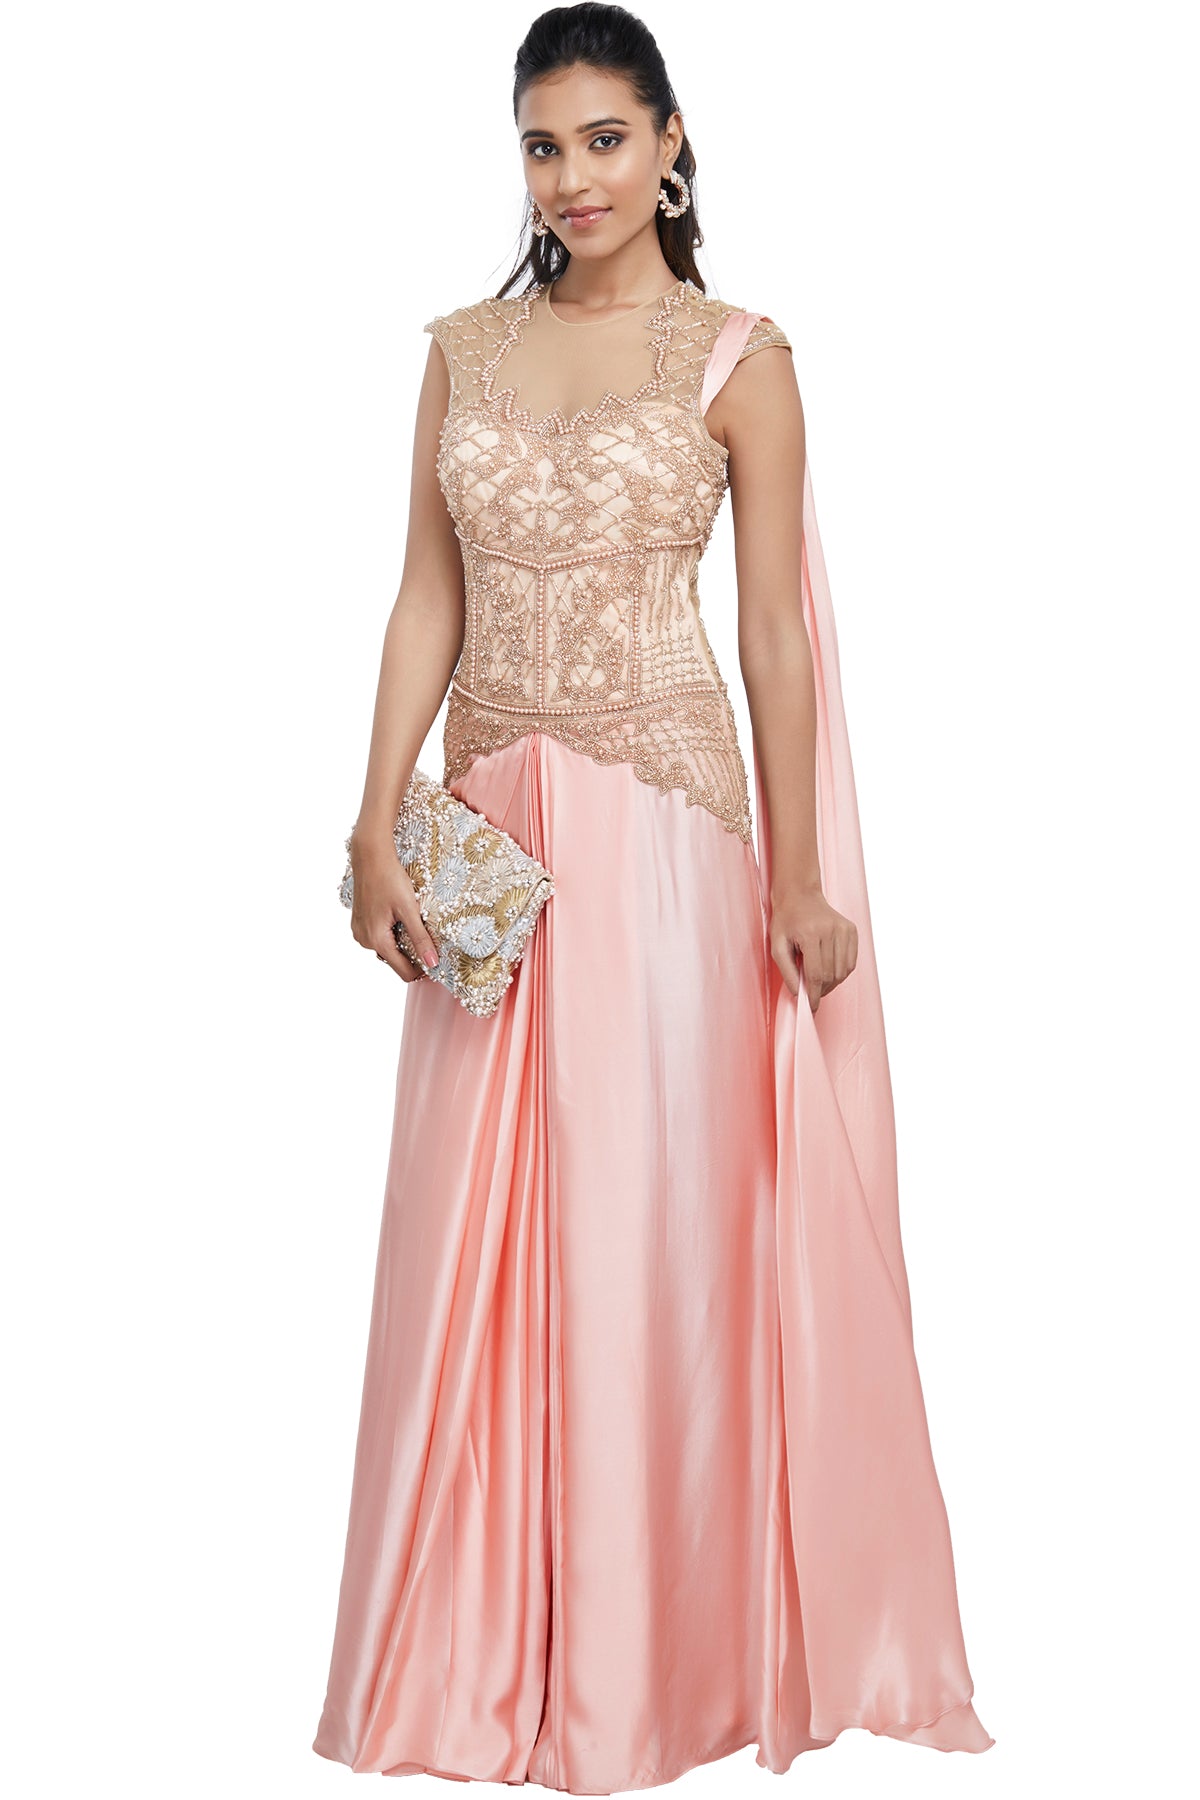 The epitome of east meets west, this baby pink soft net and cotton satin lehenga sari has a well-fitted, defining gold pearl & bead embroidered bodice. For your comfort, the outfit has a side zip and snap button closure on the shoulder.